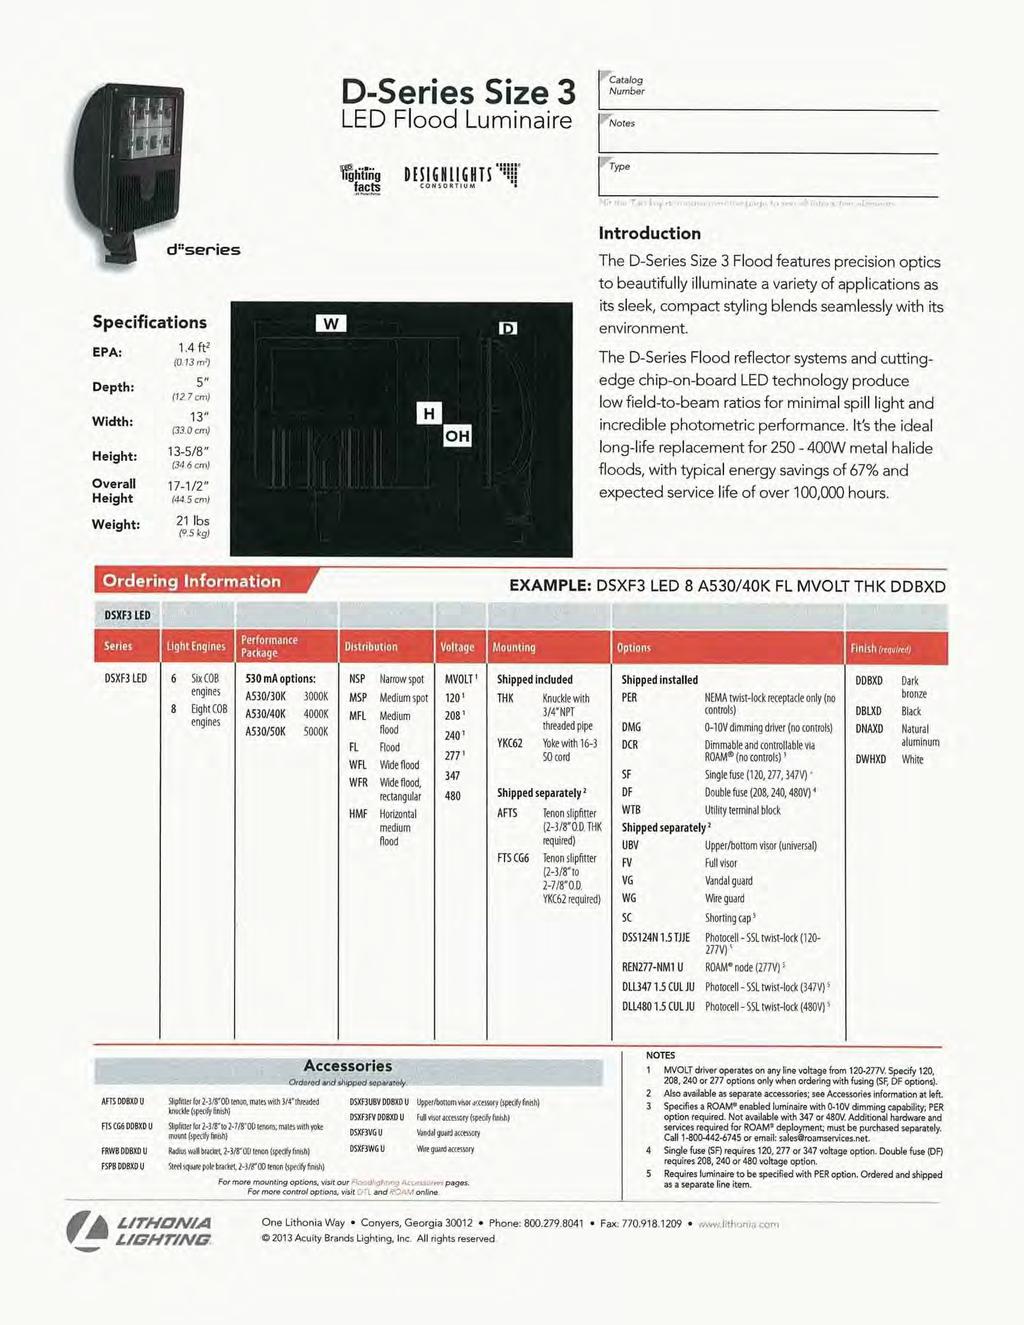 D-Series Size 3 LED Flood Luminaire Catalog Number Notes f acts DISIGNIIGIITS 1 11 CONSORTIUM Type Introduction The D-Series Size 3 Flood features precision optics to beautifully illuminate a variety